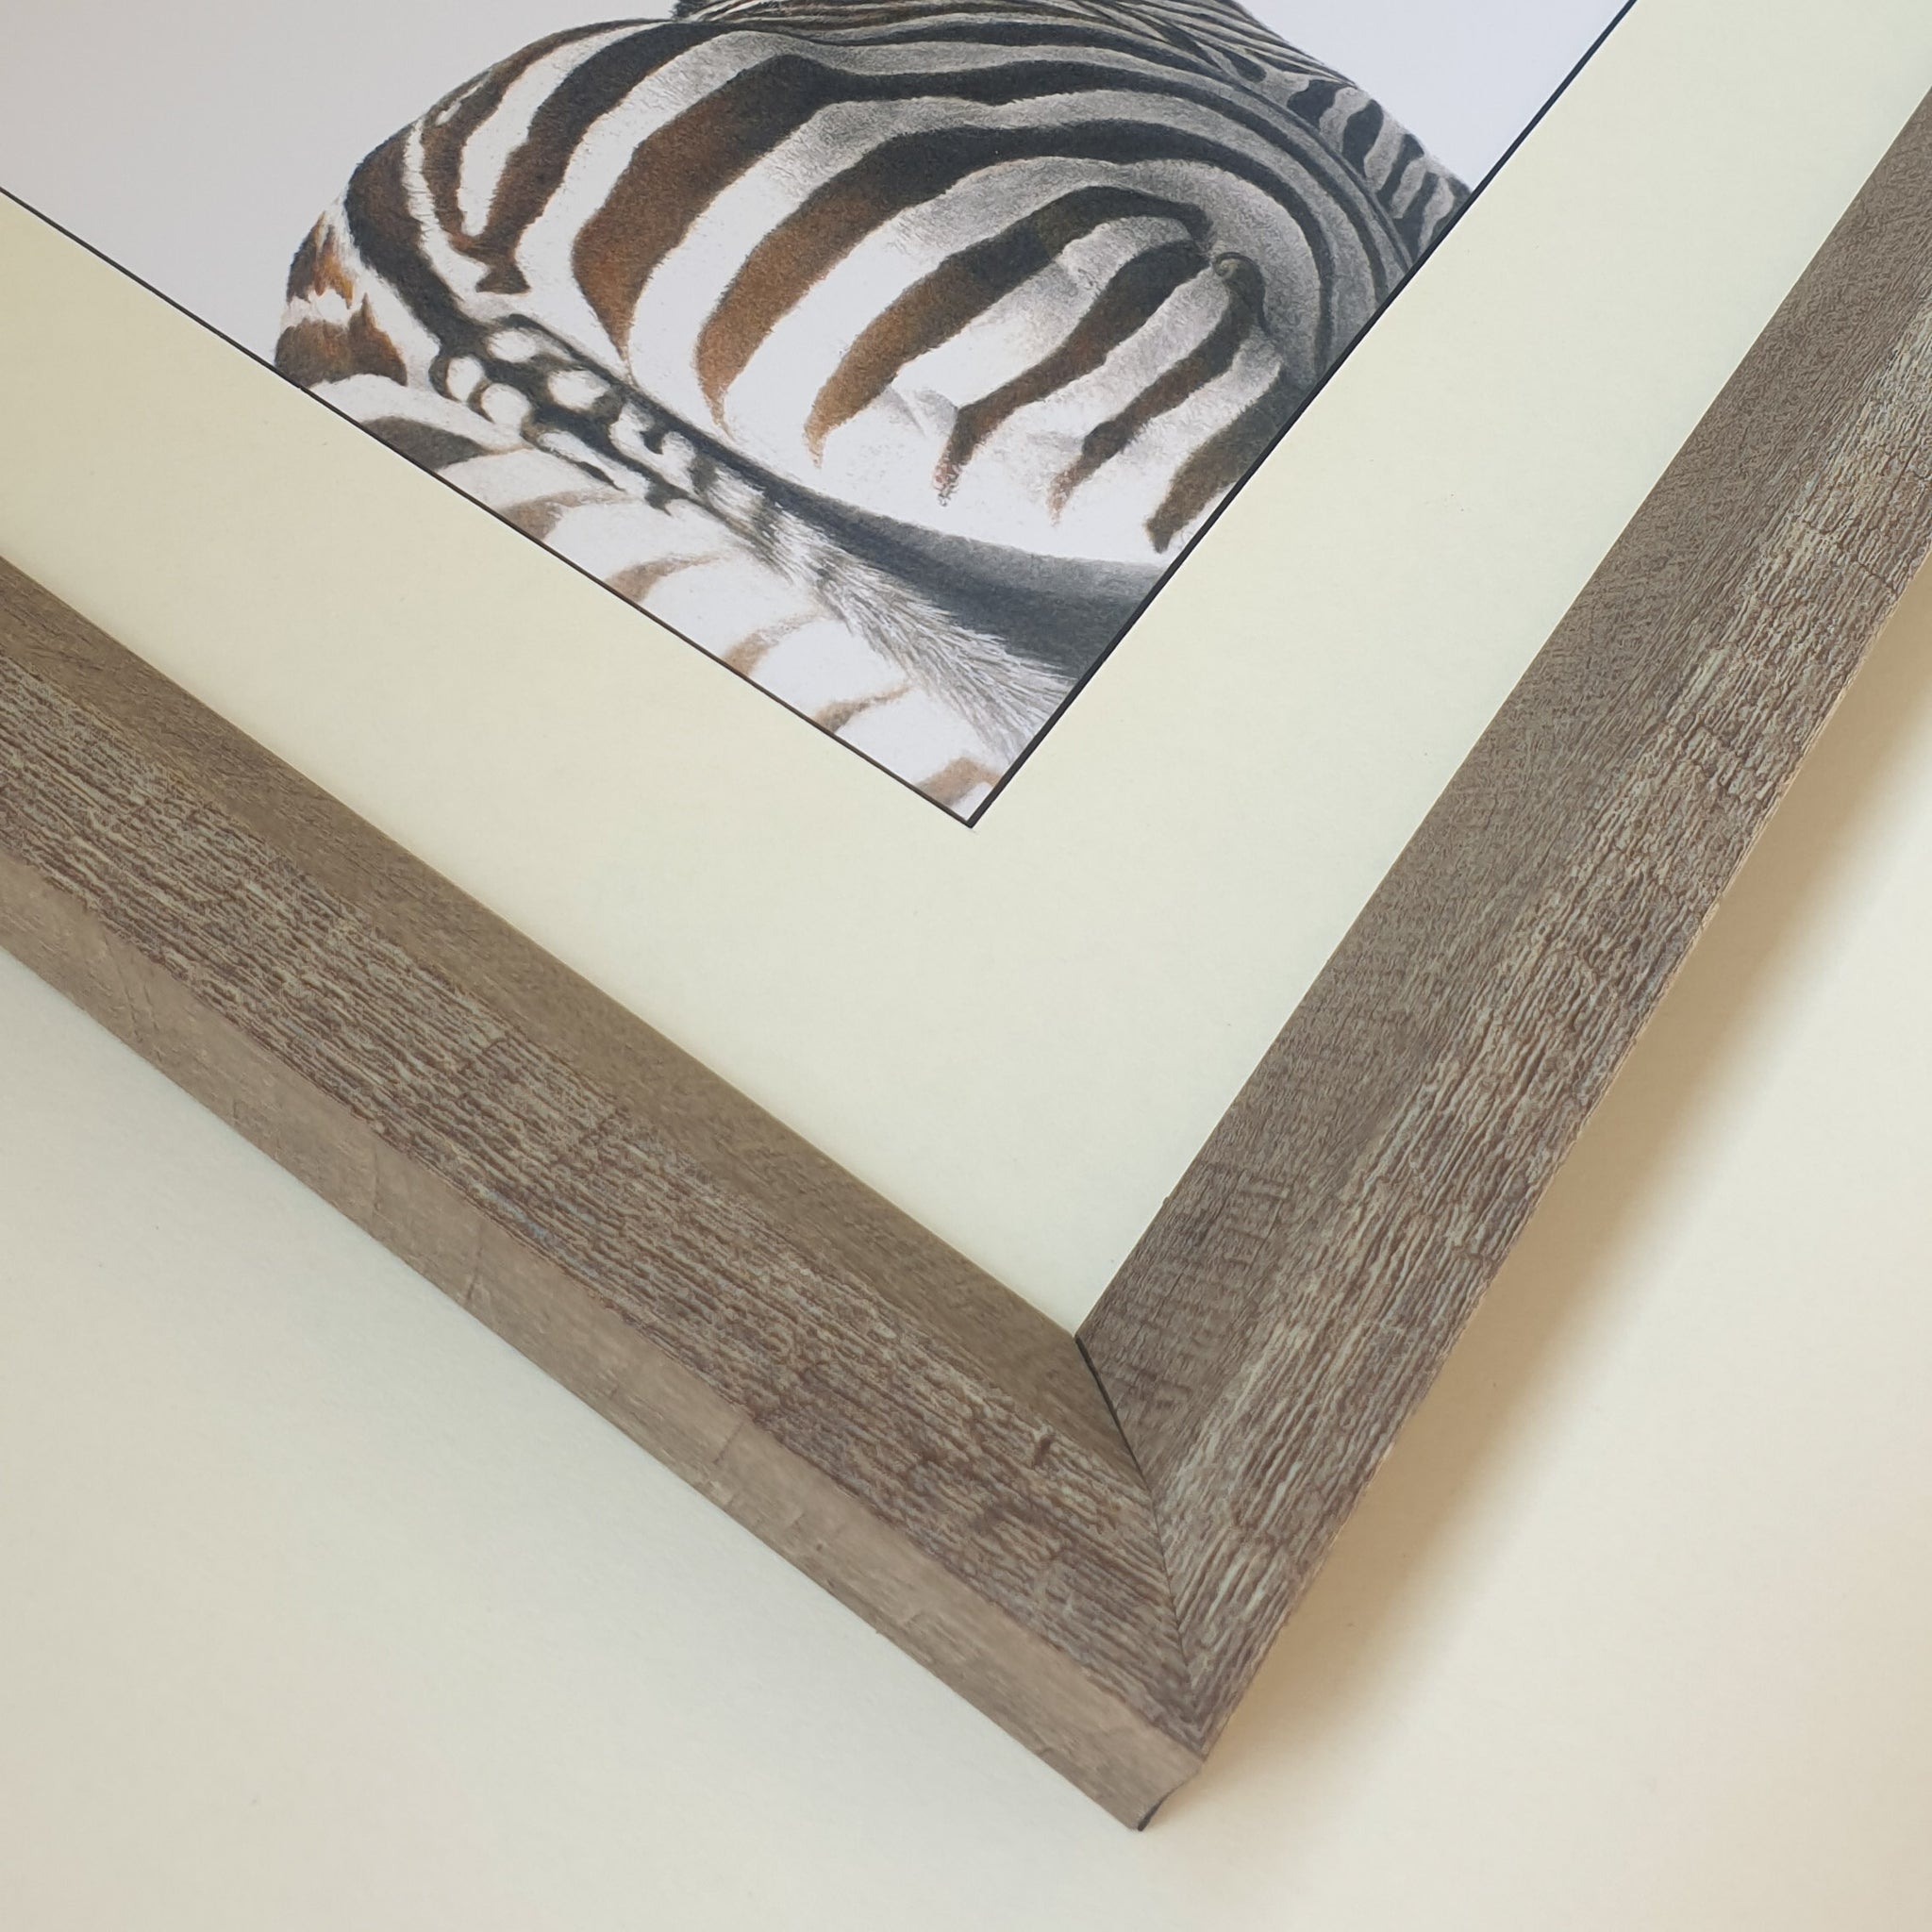 Zebra Portrait in a synthetic wood style frame